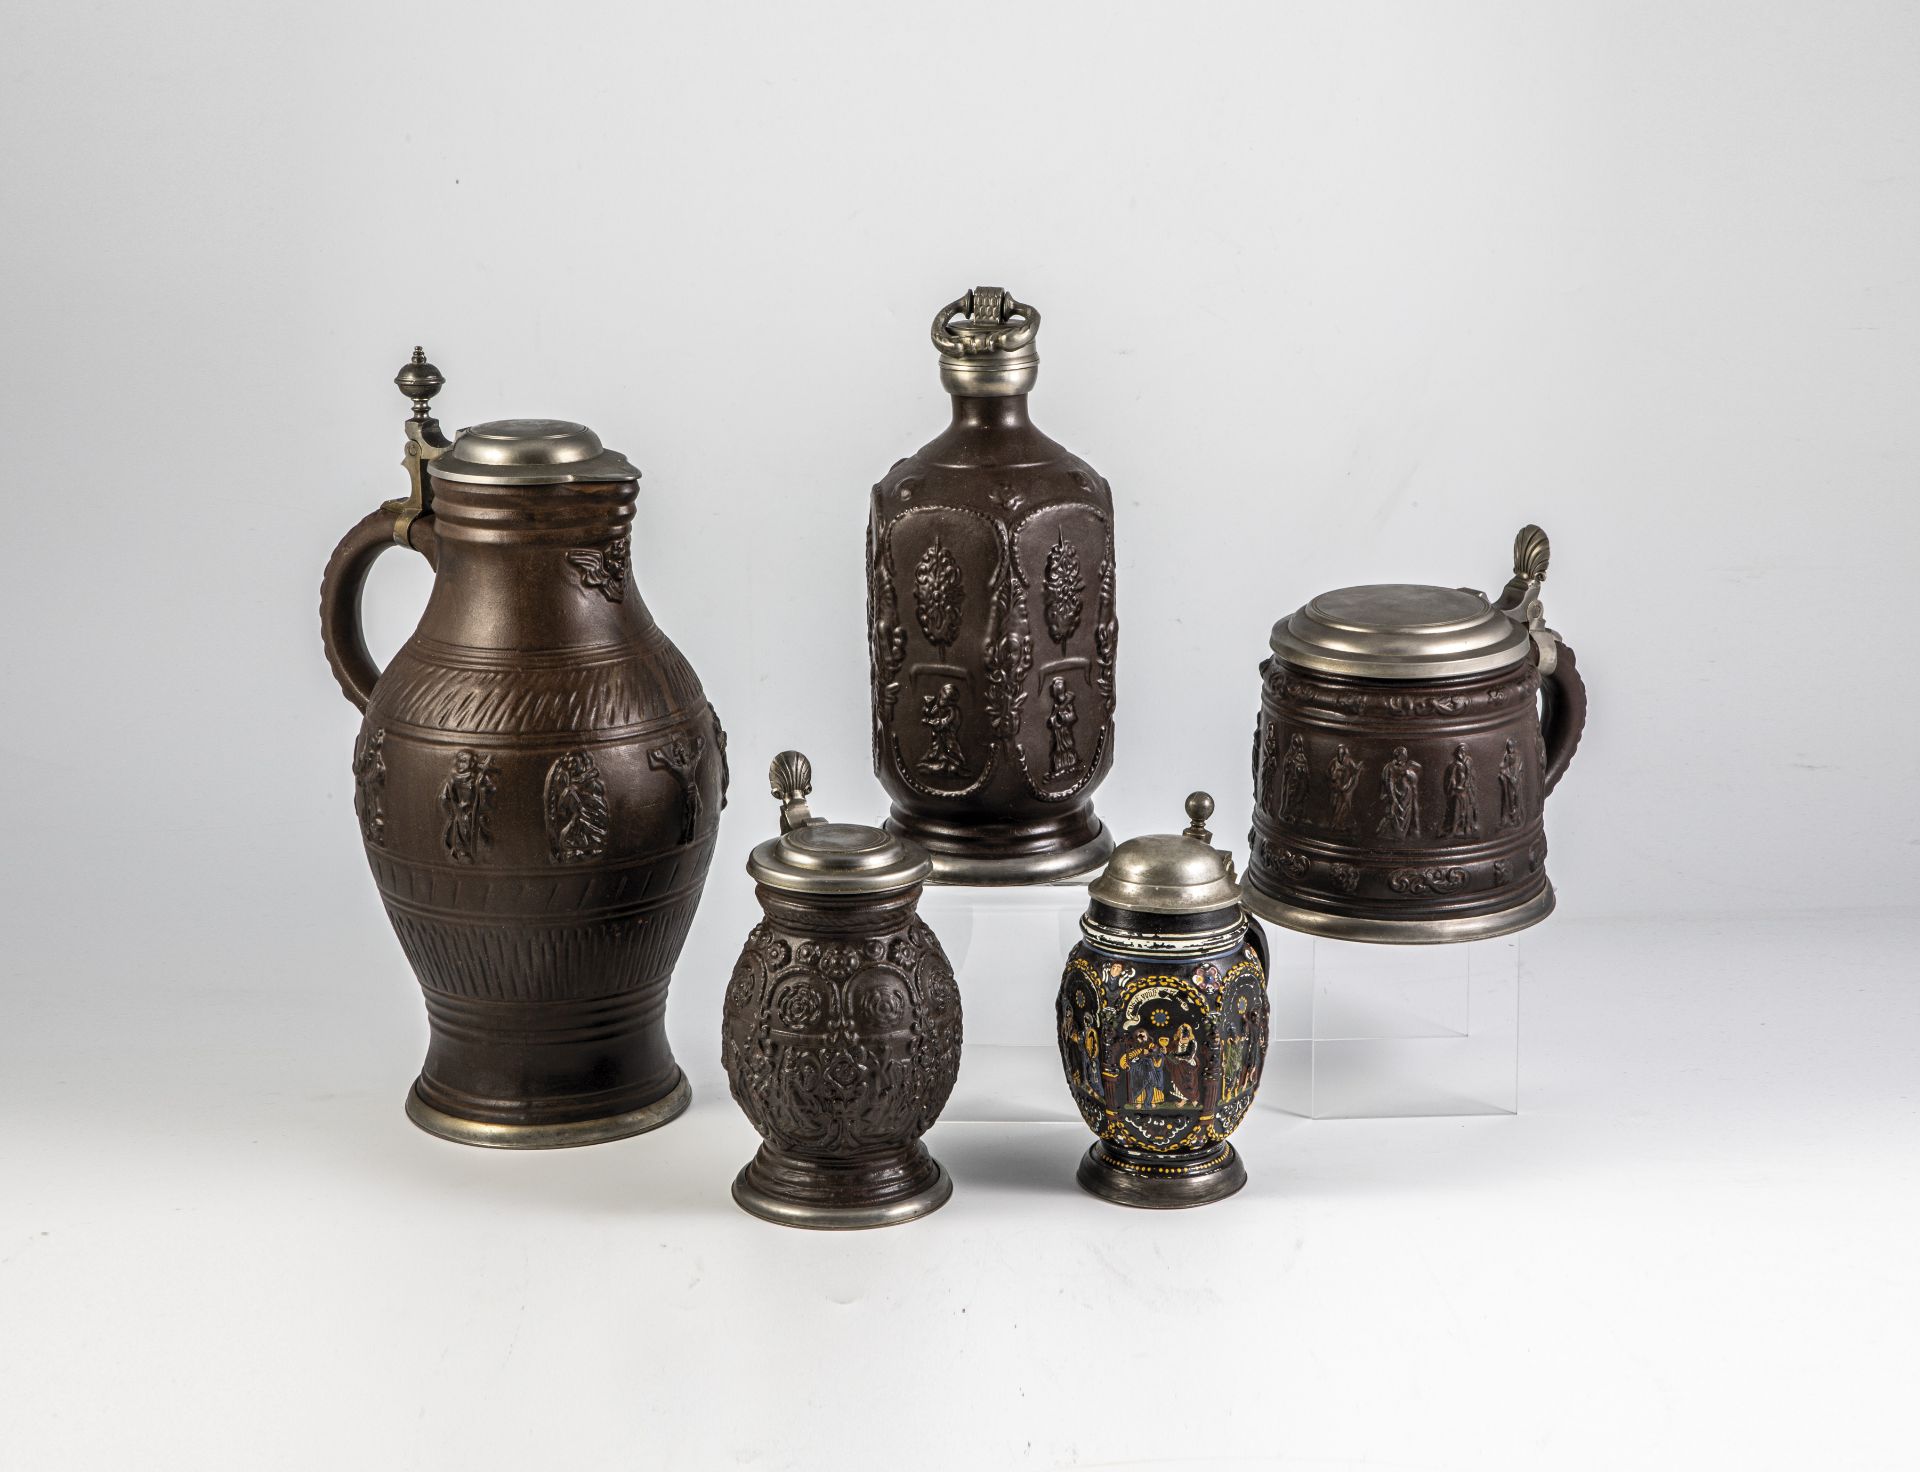 Four jugs and one apothecary bottle with relief overlays